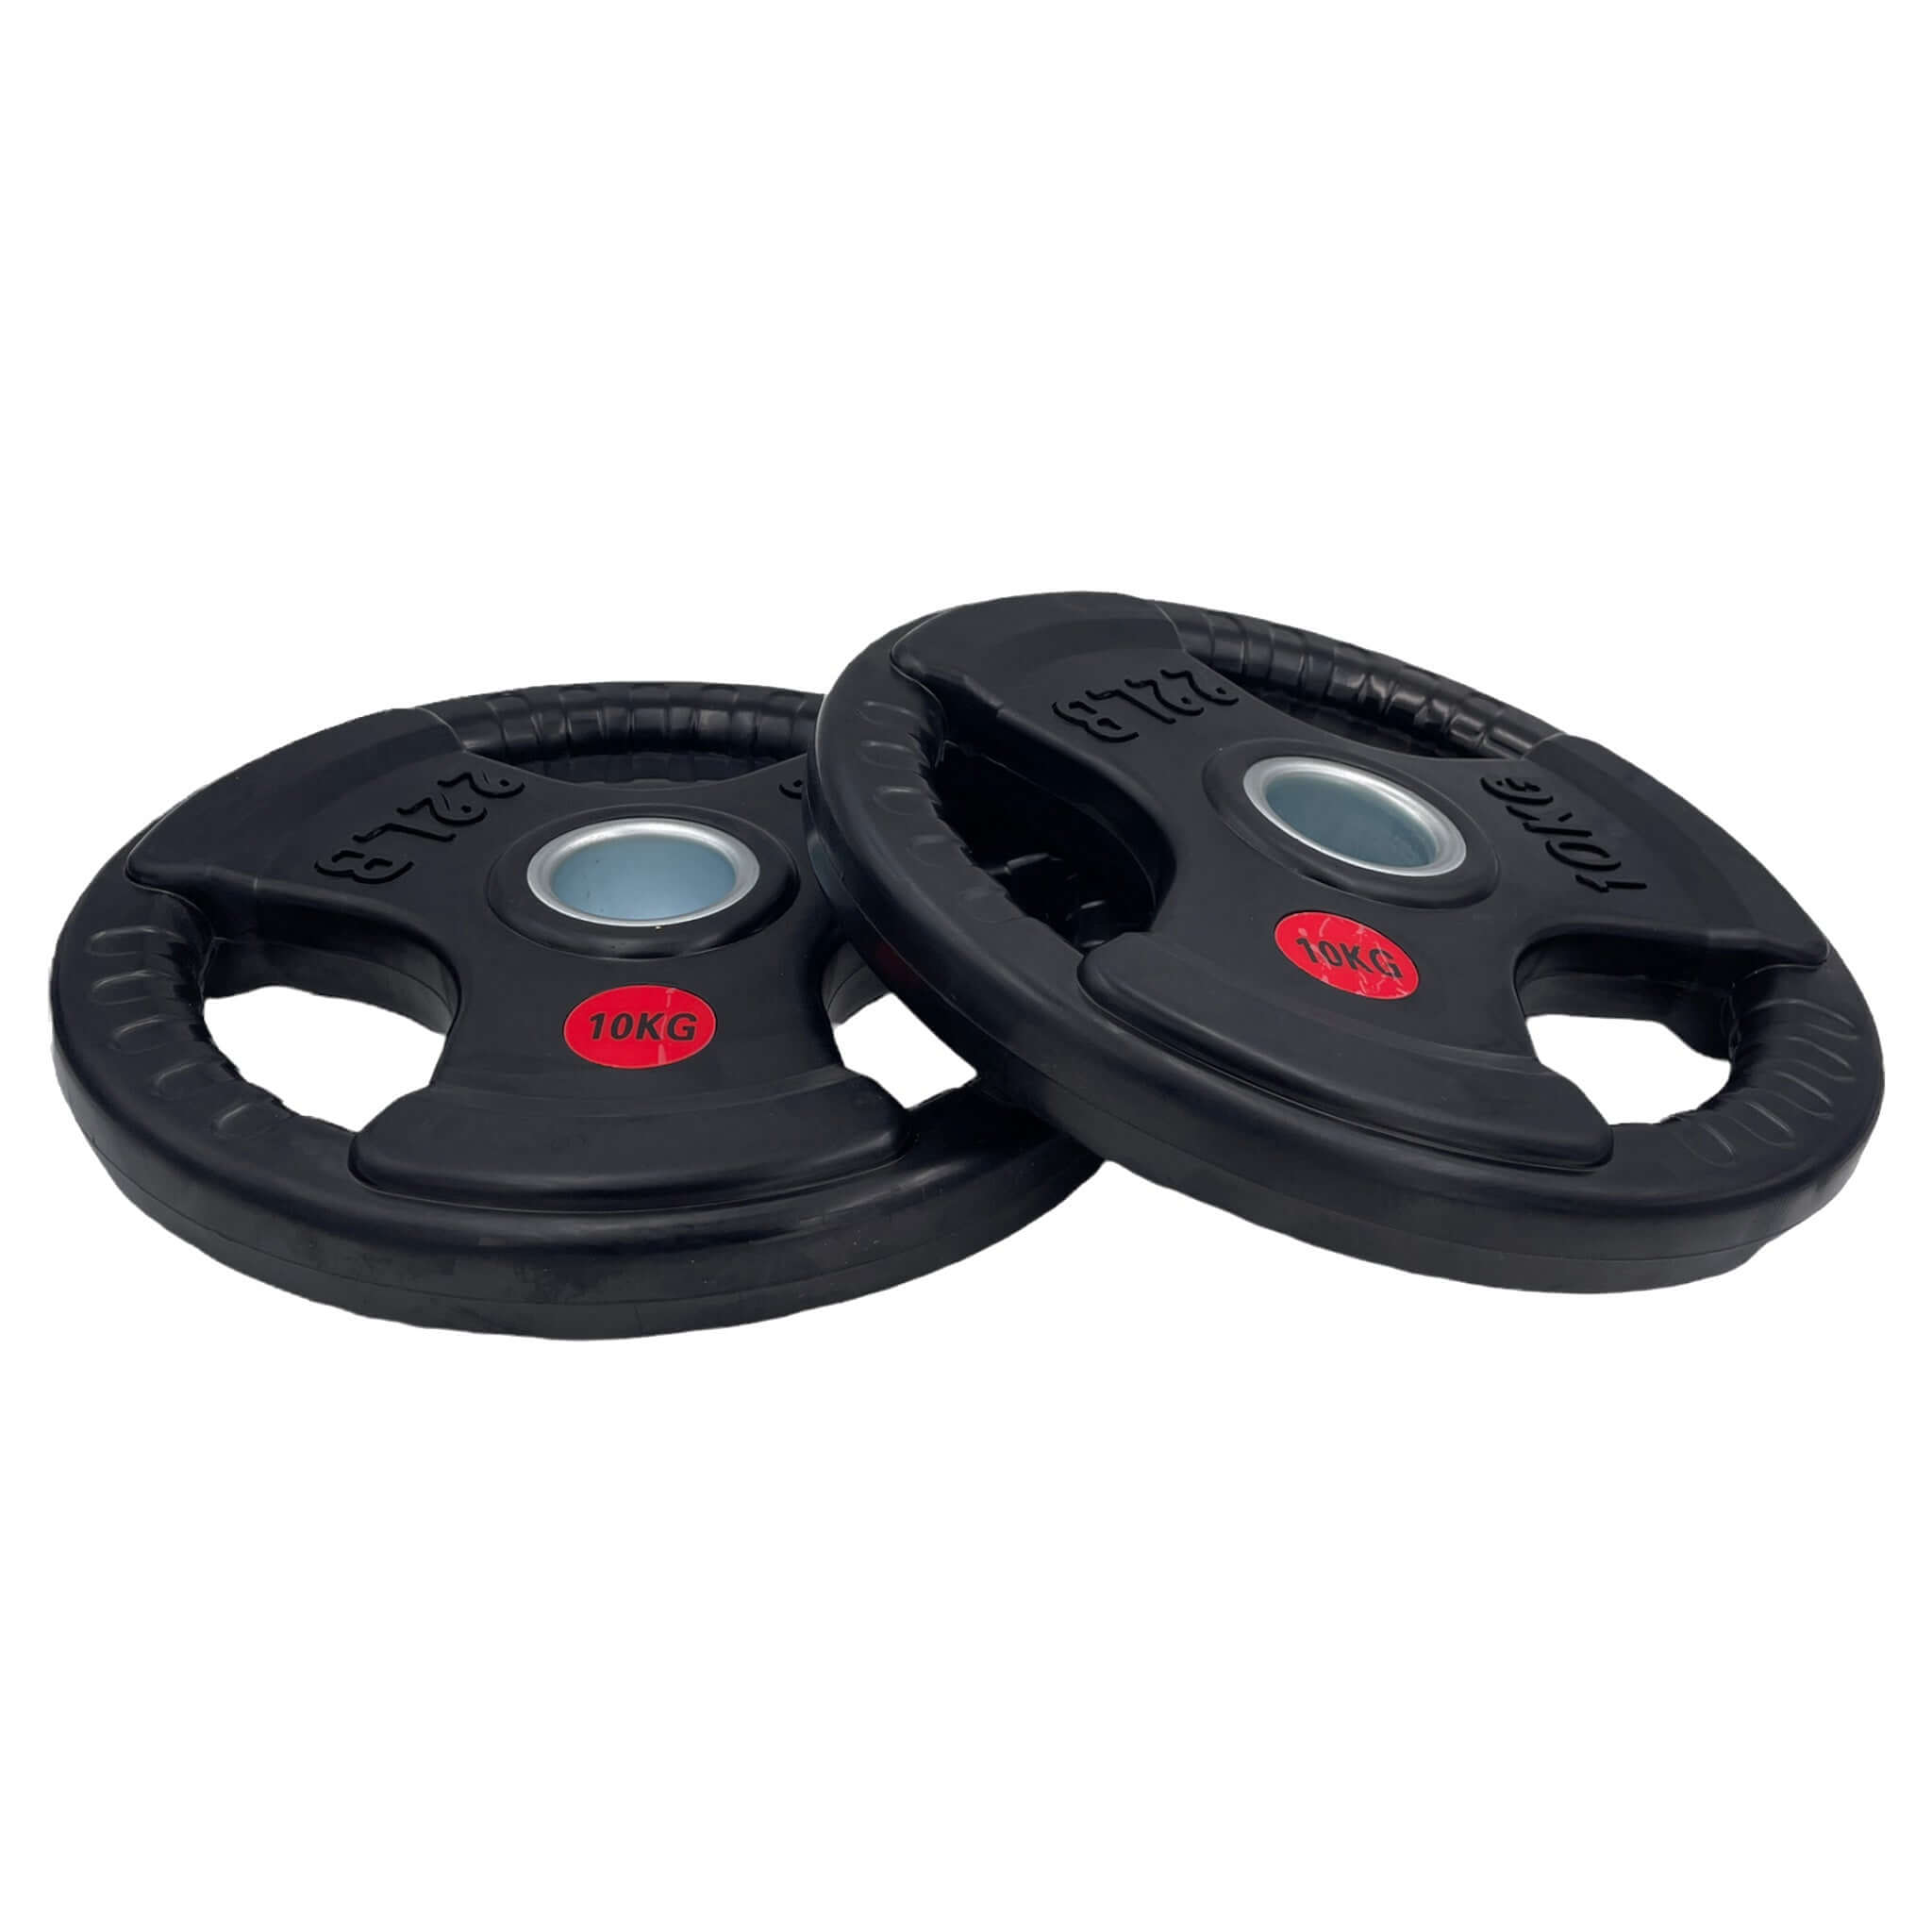 Rubber Coated Type-O Tri-Grip Weight Plates 100kg Bundle | Tri Grip Rubber Plates | INSOURCE